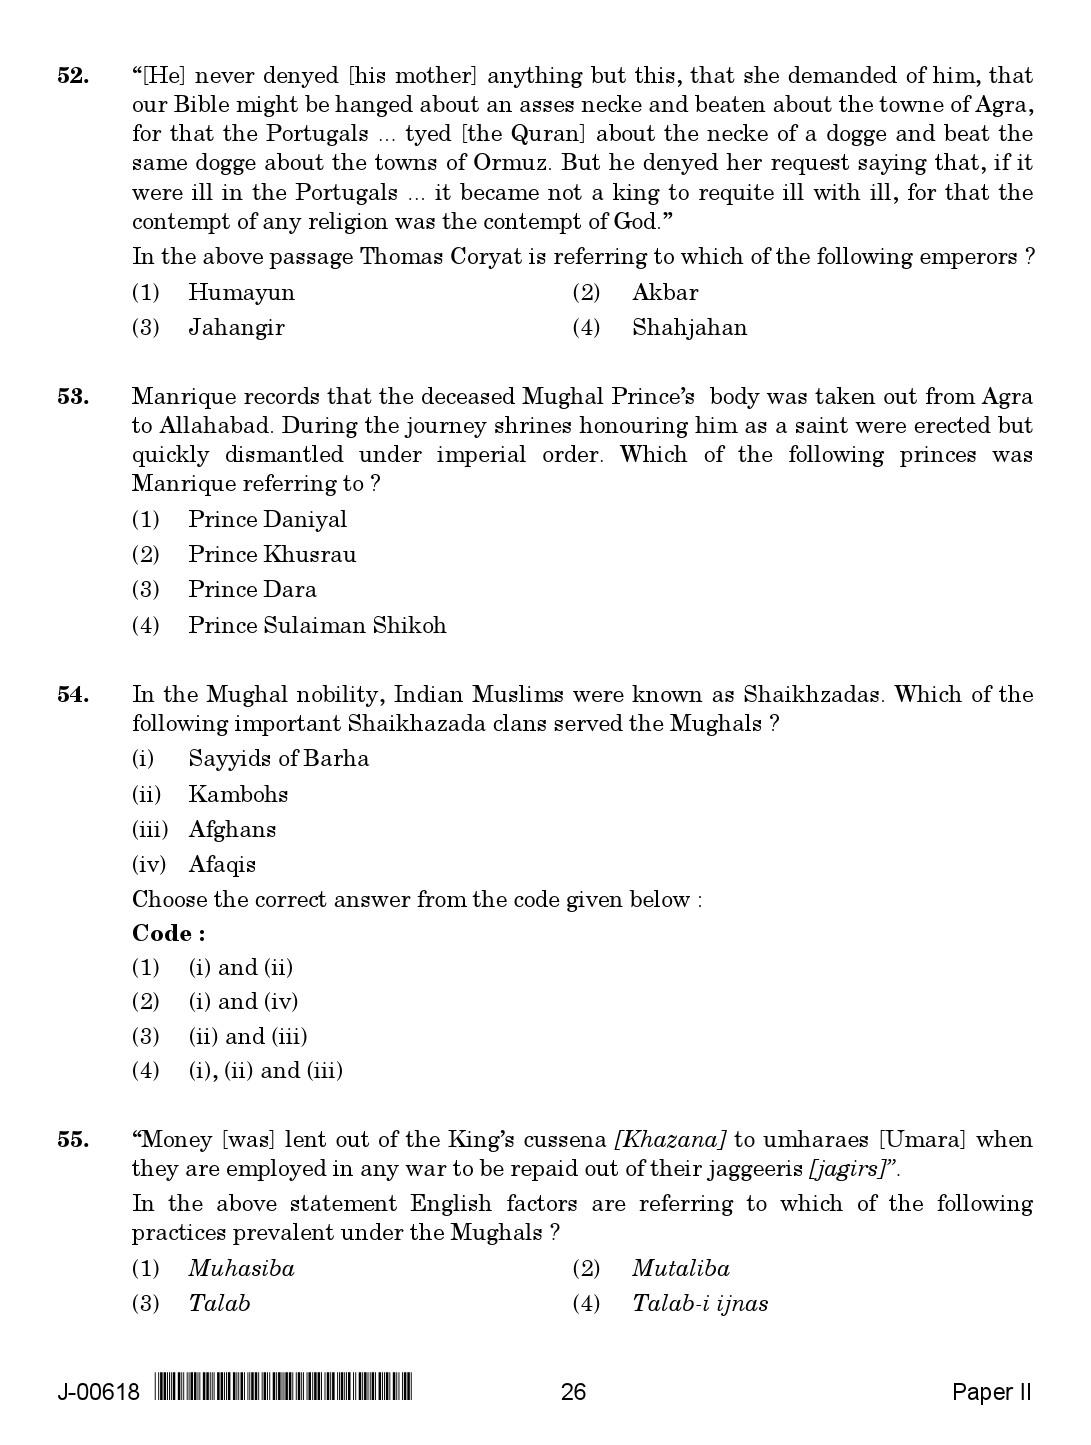 History Question Paper II July 2018 in English 2nd Exam 14